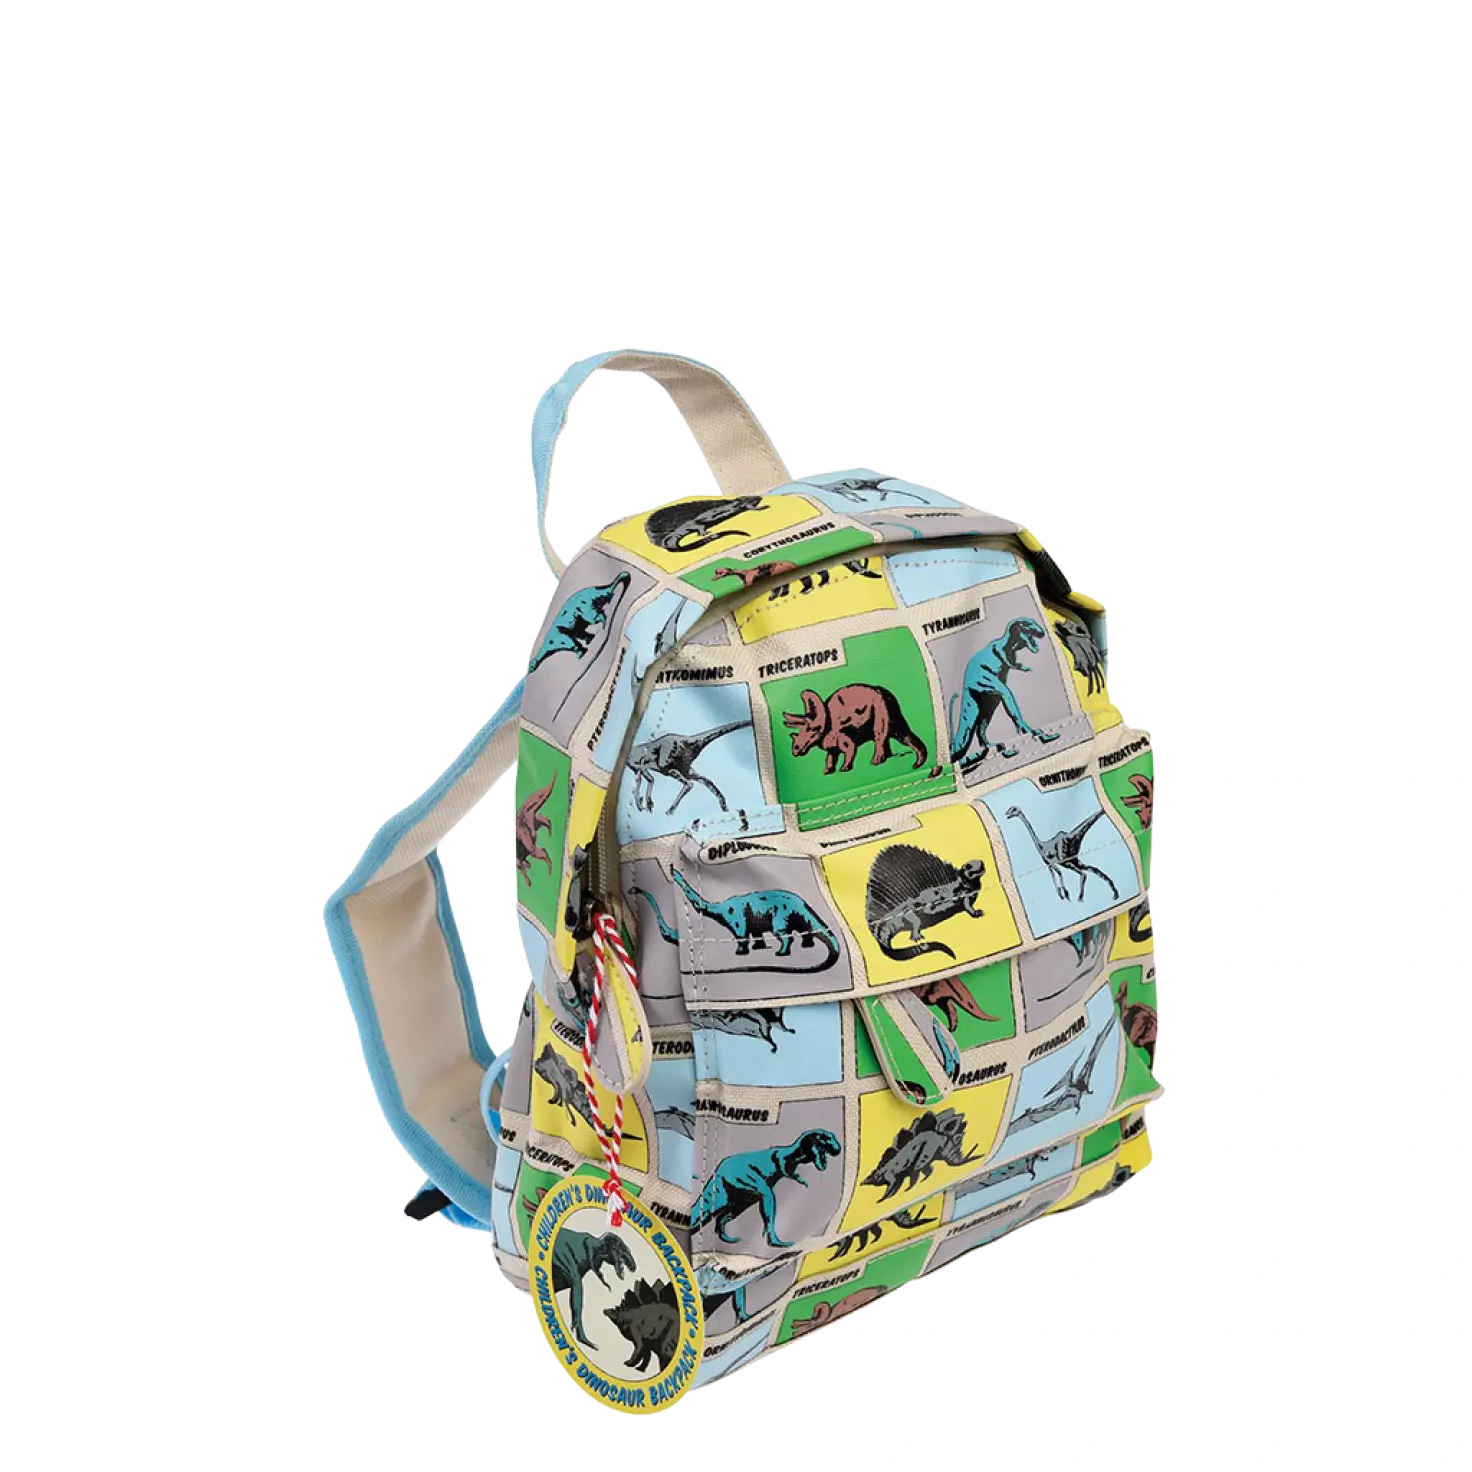 A childs backpack by Rex London, style Prehistoric Land, in blue, green and yellow multi dino print, two compartments with zip fastenings. Angled view.